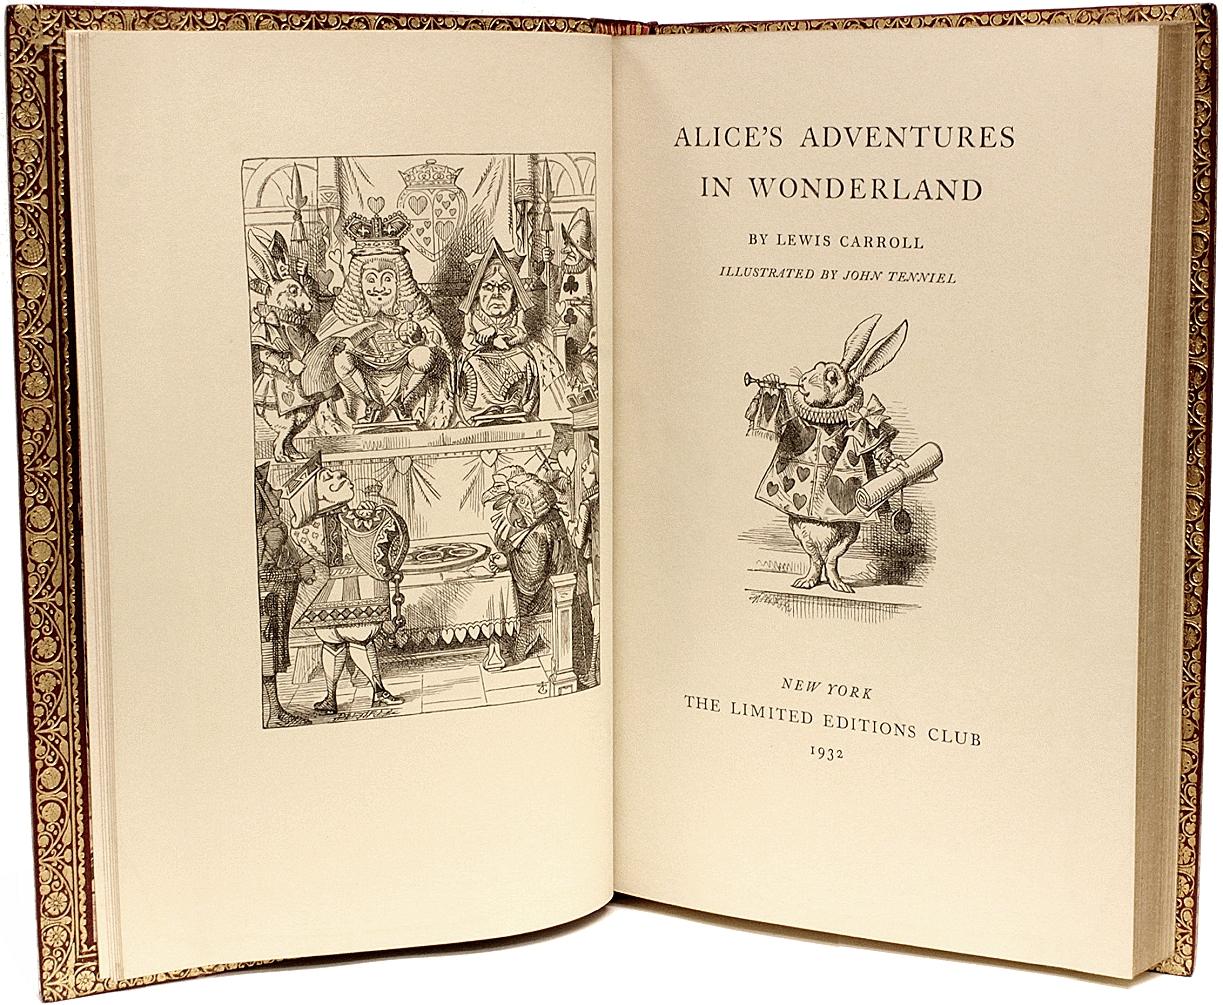 Lewis Carroll, Alice's Adventures in Wonderland, Signed by The Real Alice, 1932 1